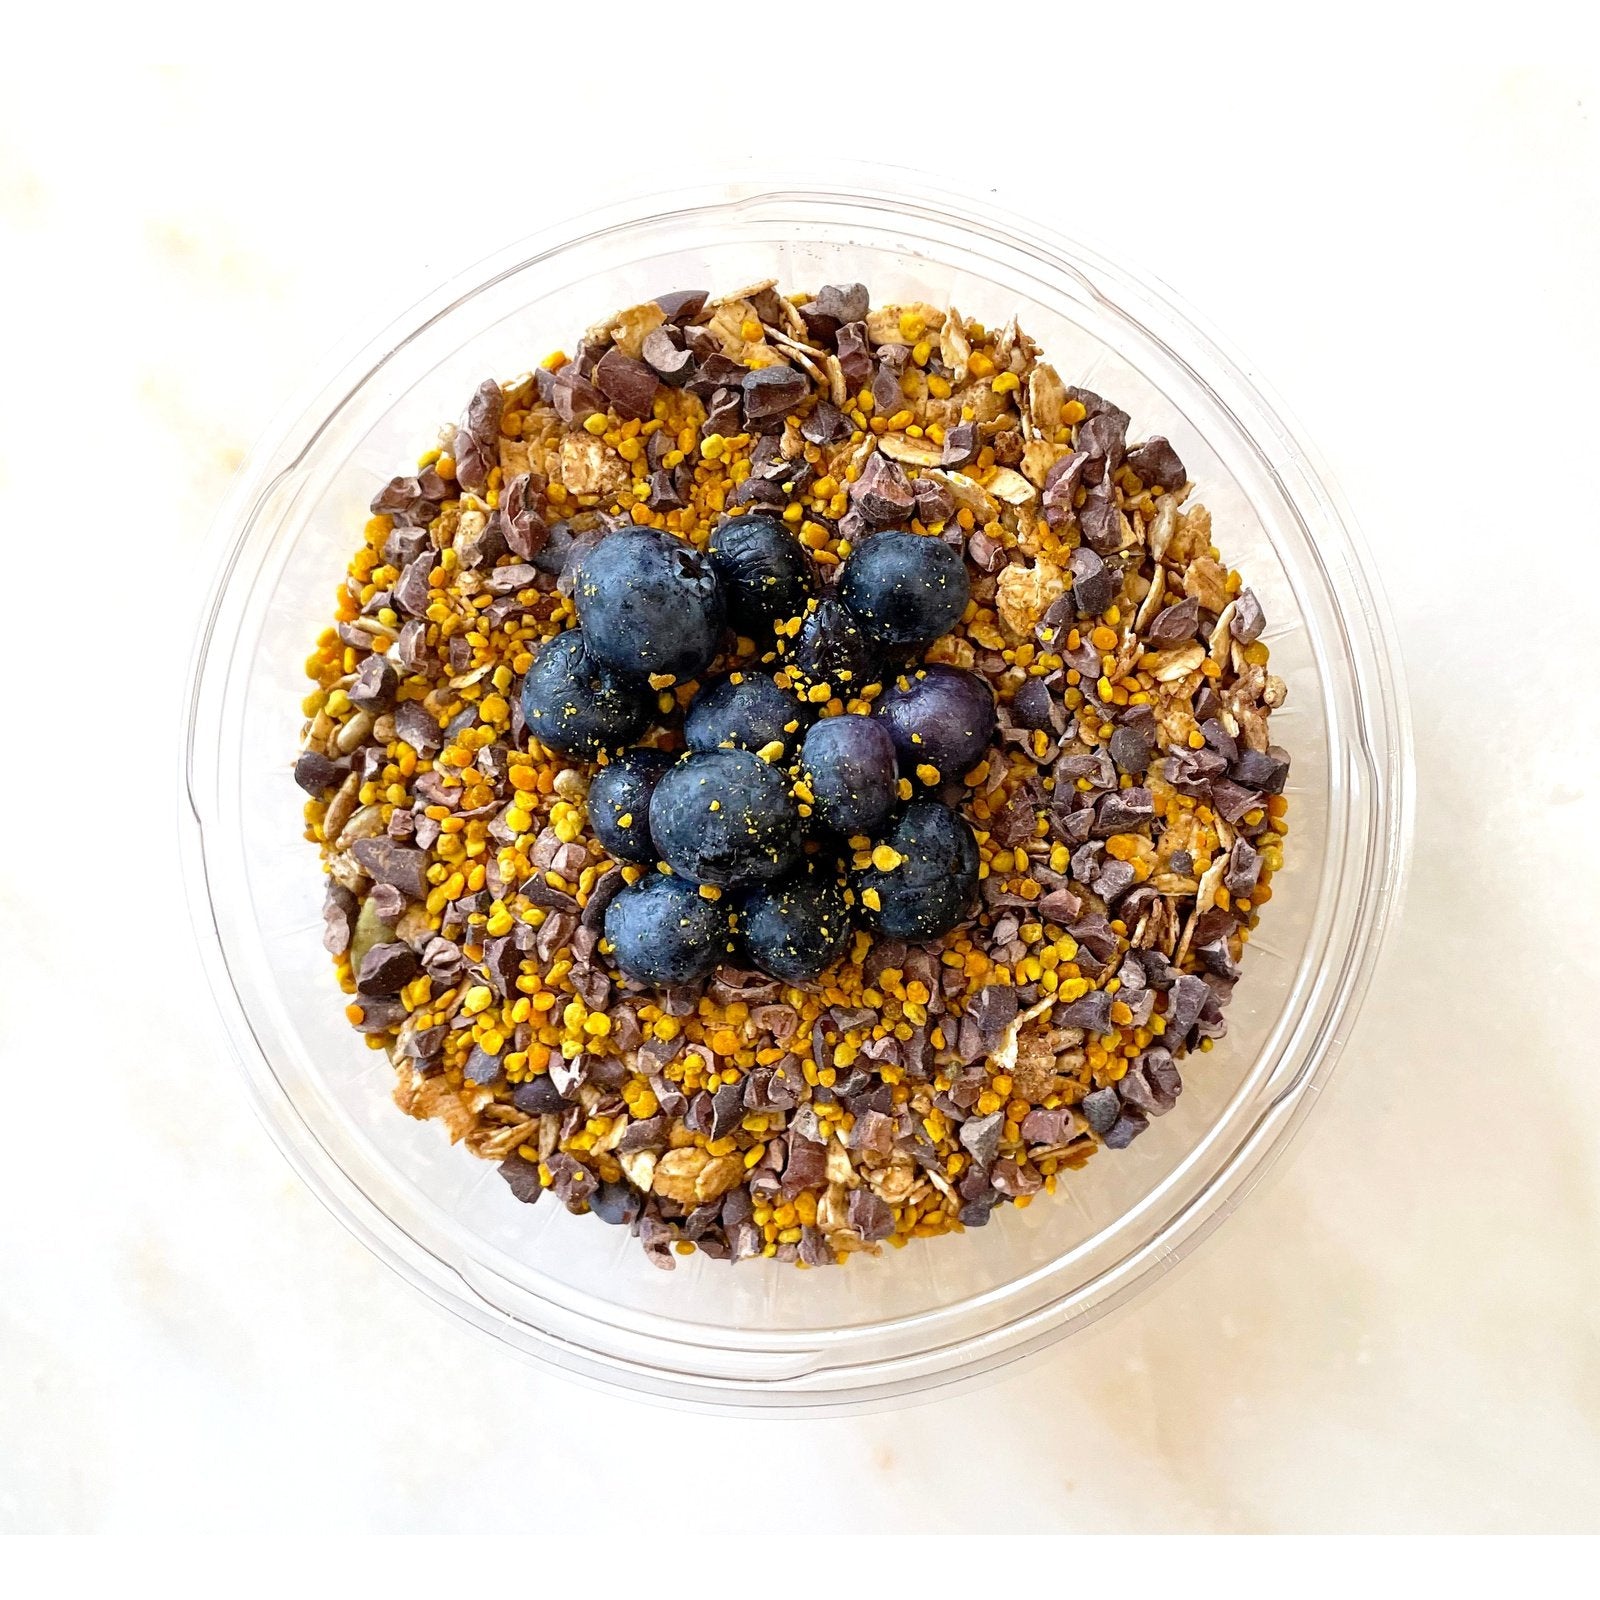 Nicole's Bowl was created by the fitness instructor Nicole. She wanted a bowl low in calories and with protein, maca, cacao, bee pollen and blueberries.  This bowl is a favorite.